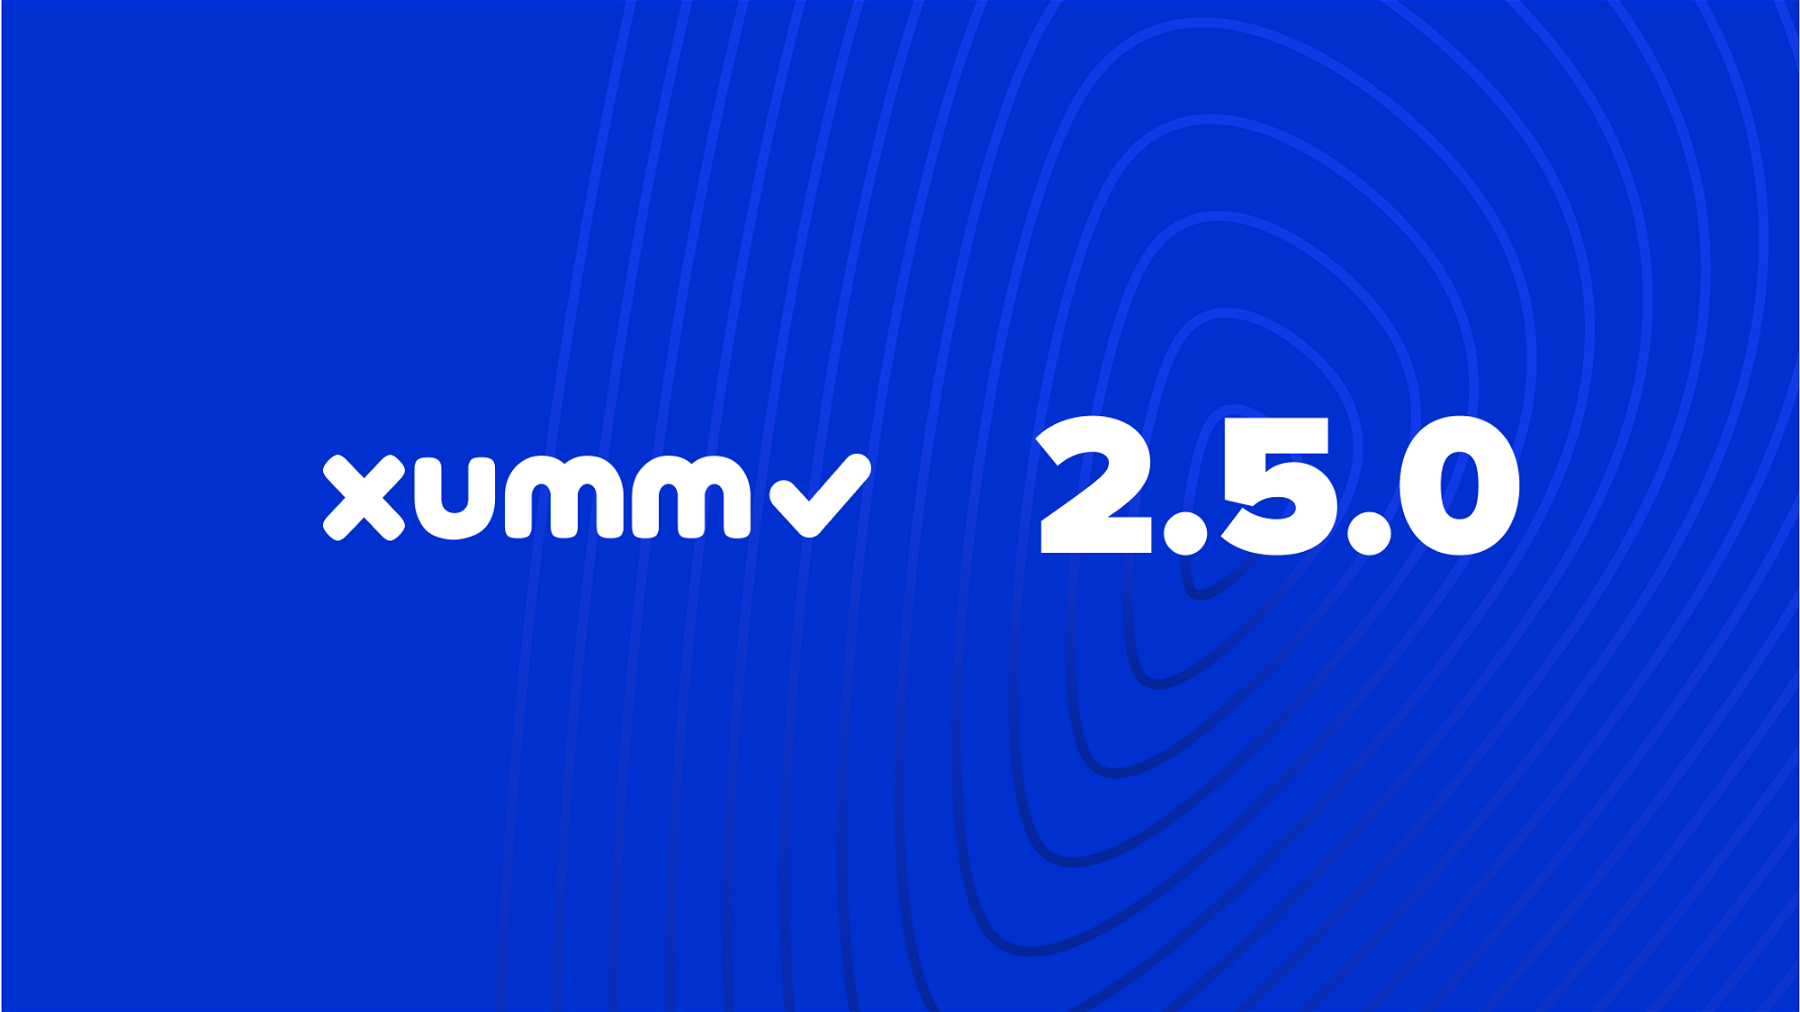 A Closer Look at What's New in the Xumm 2.5.0 Update